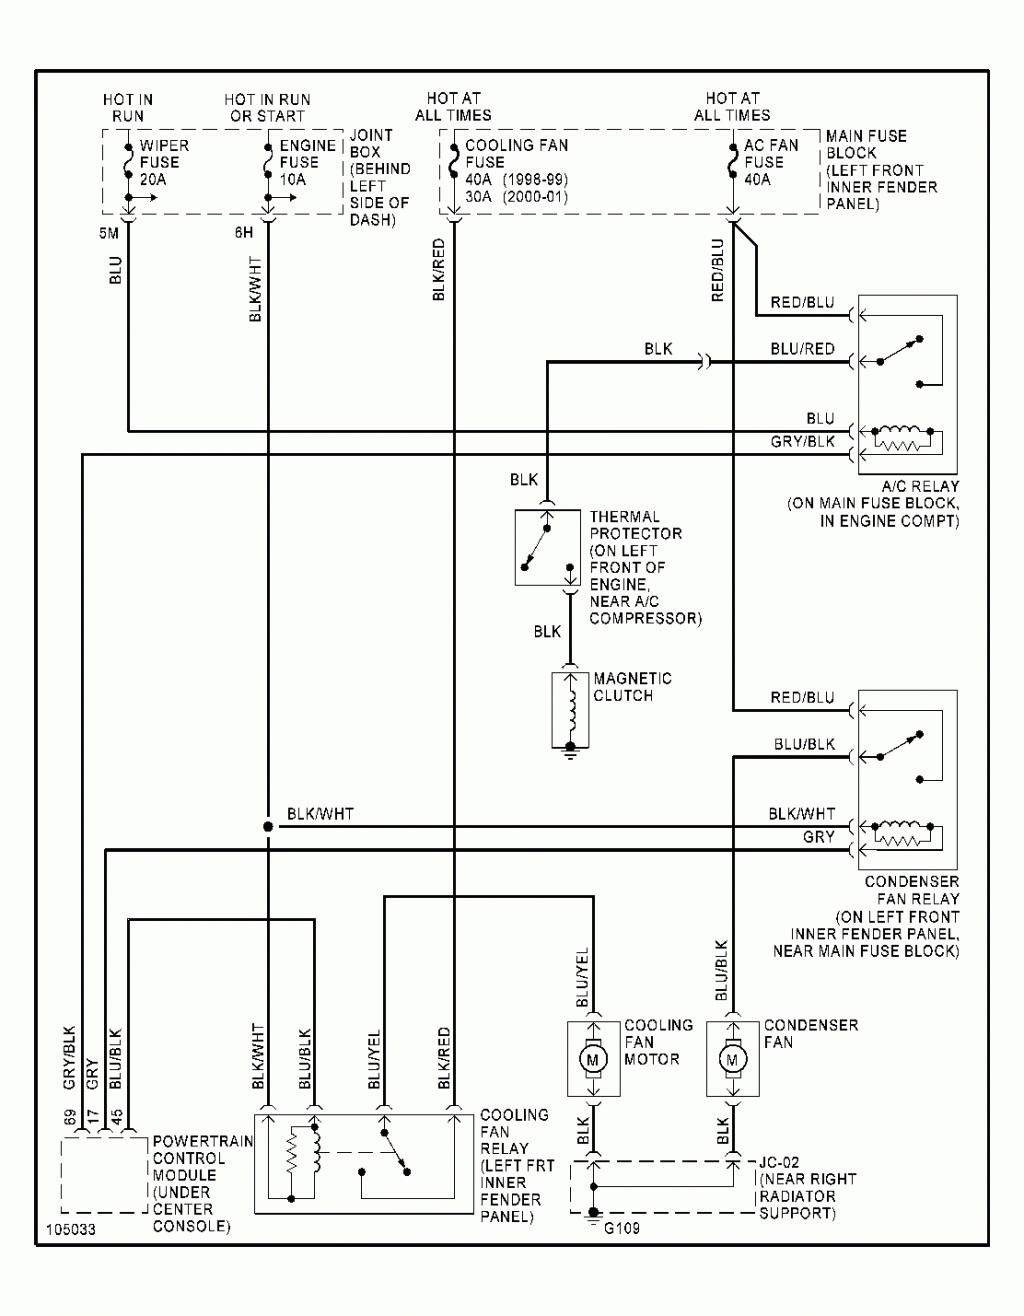 Wiring Diagram For Motorized Bicycle | Wiring Diagram - Motorized Bicycle Wiring Diagram